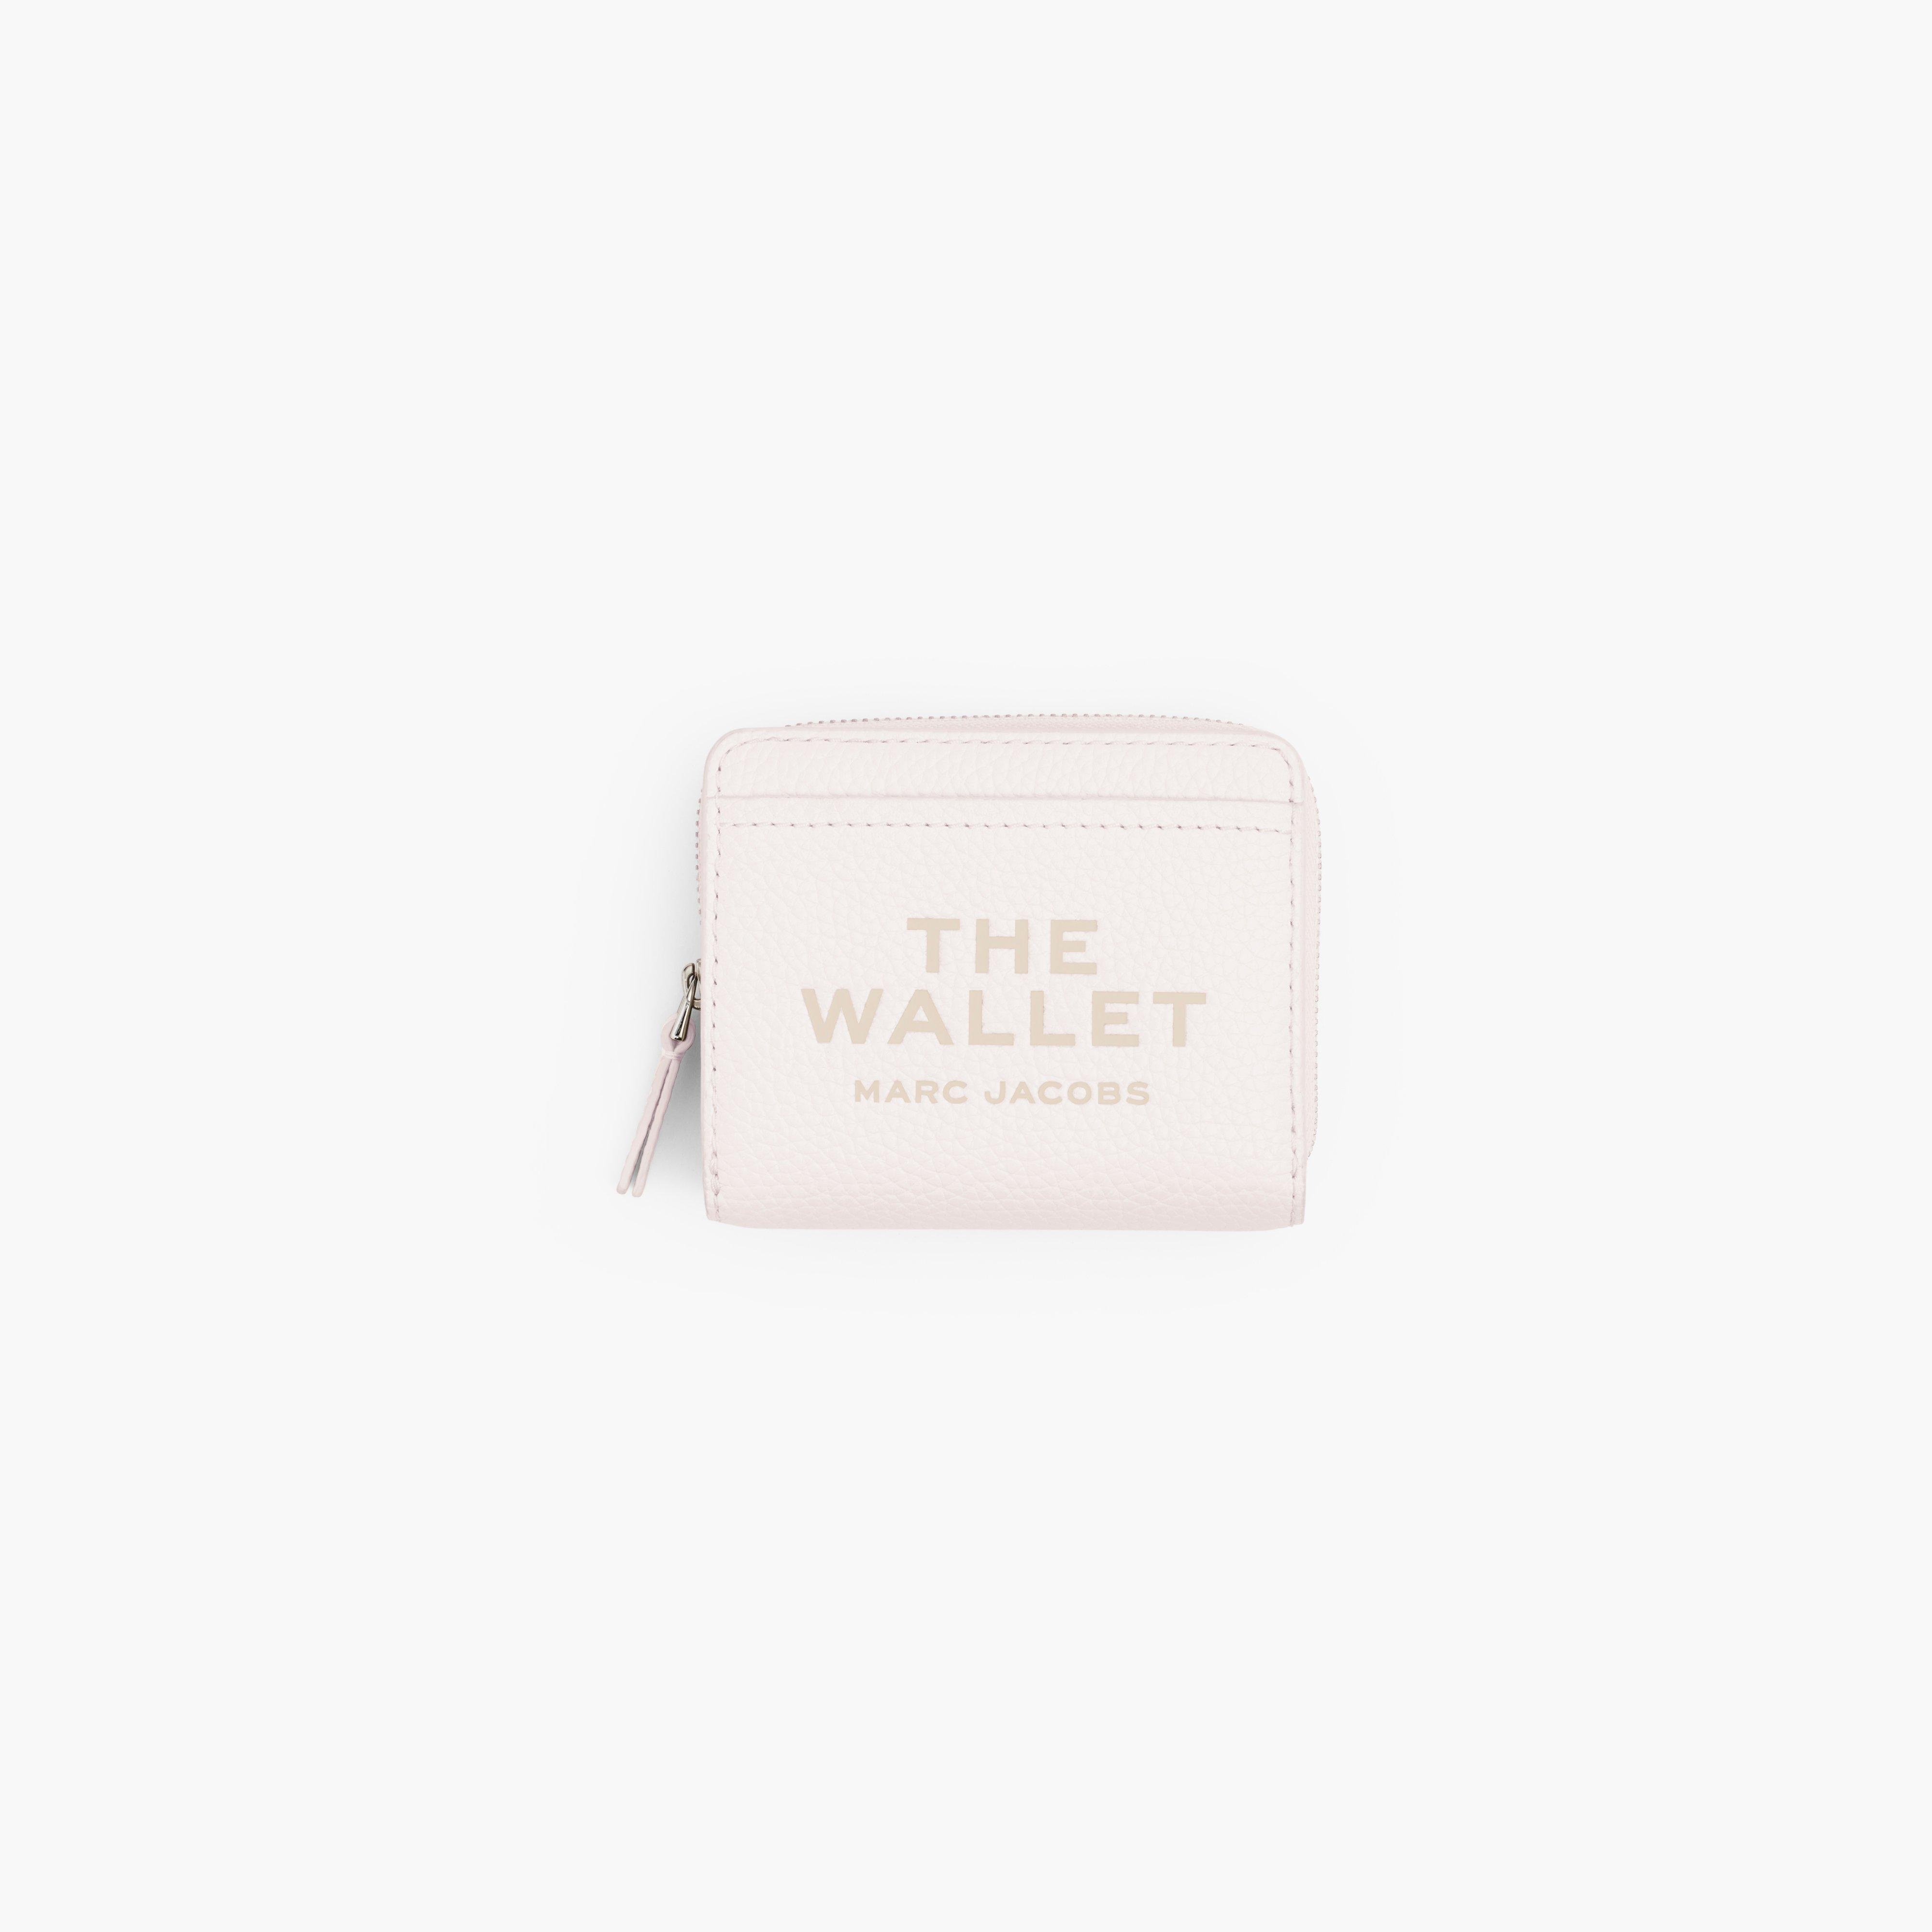 THE LEATHER MINI COMPACT WALLET - 1